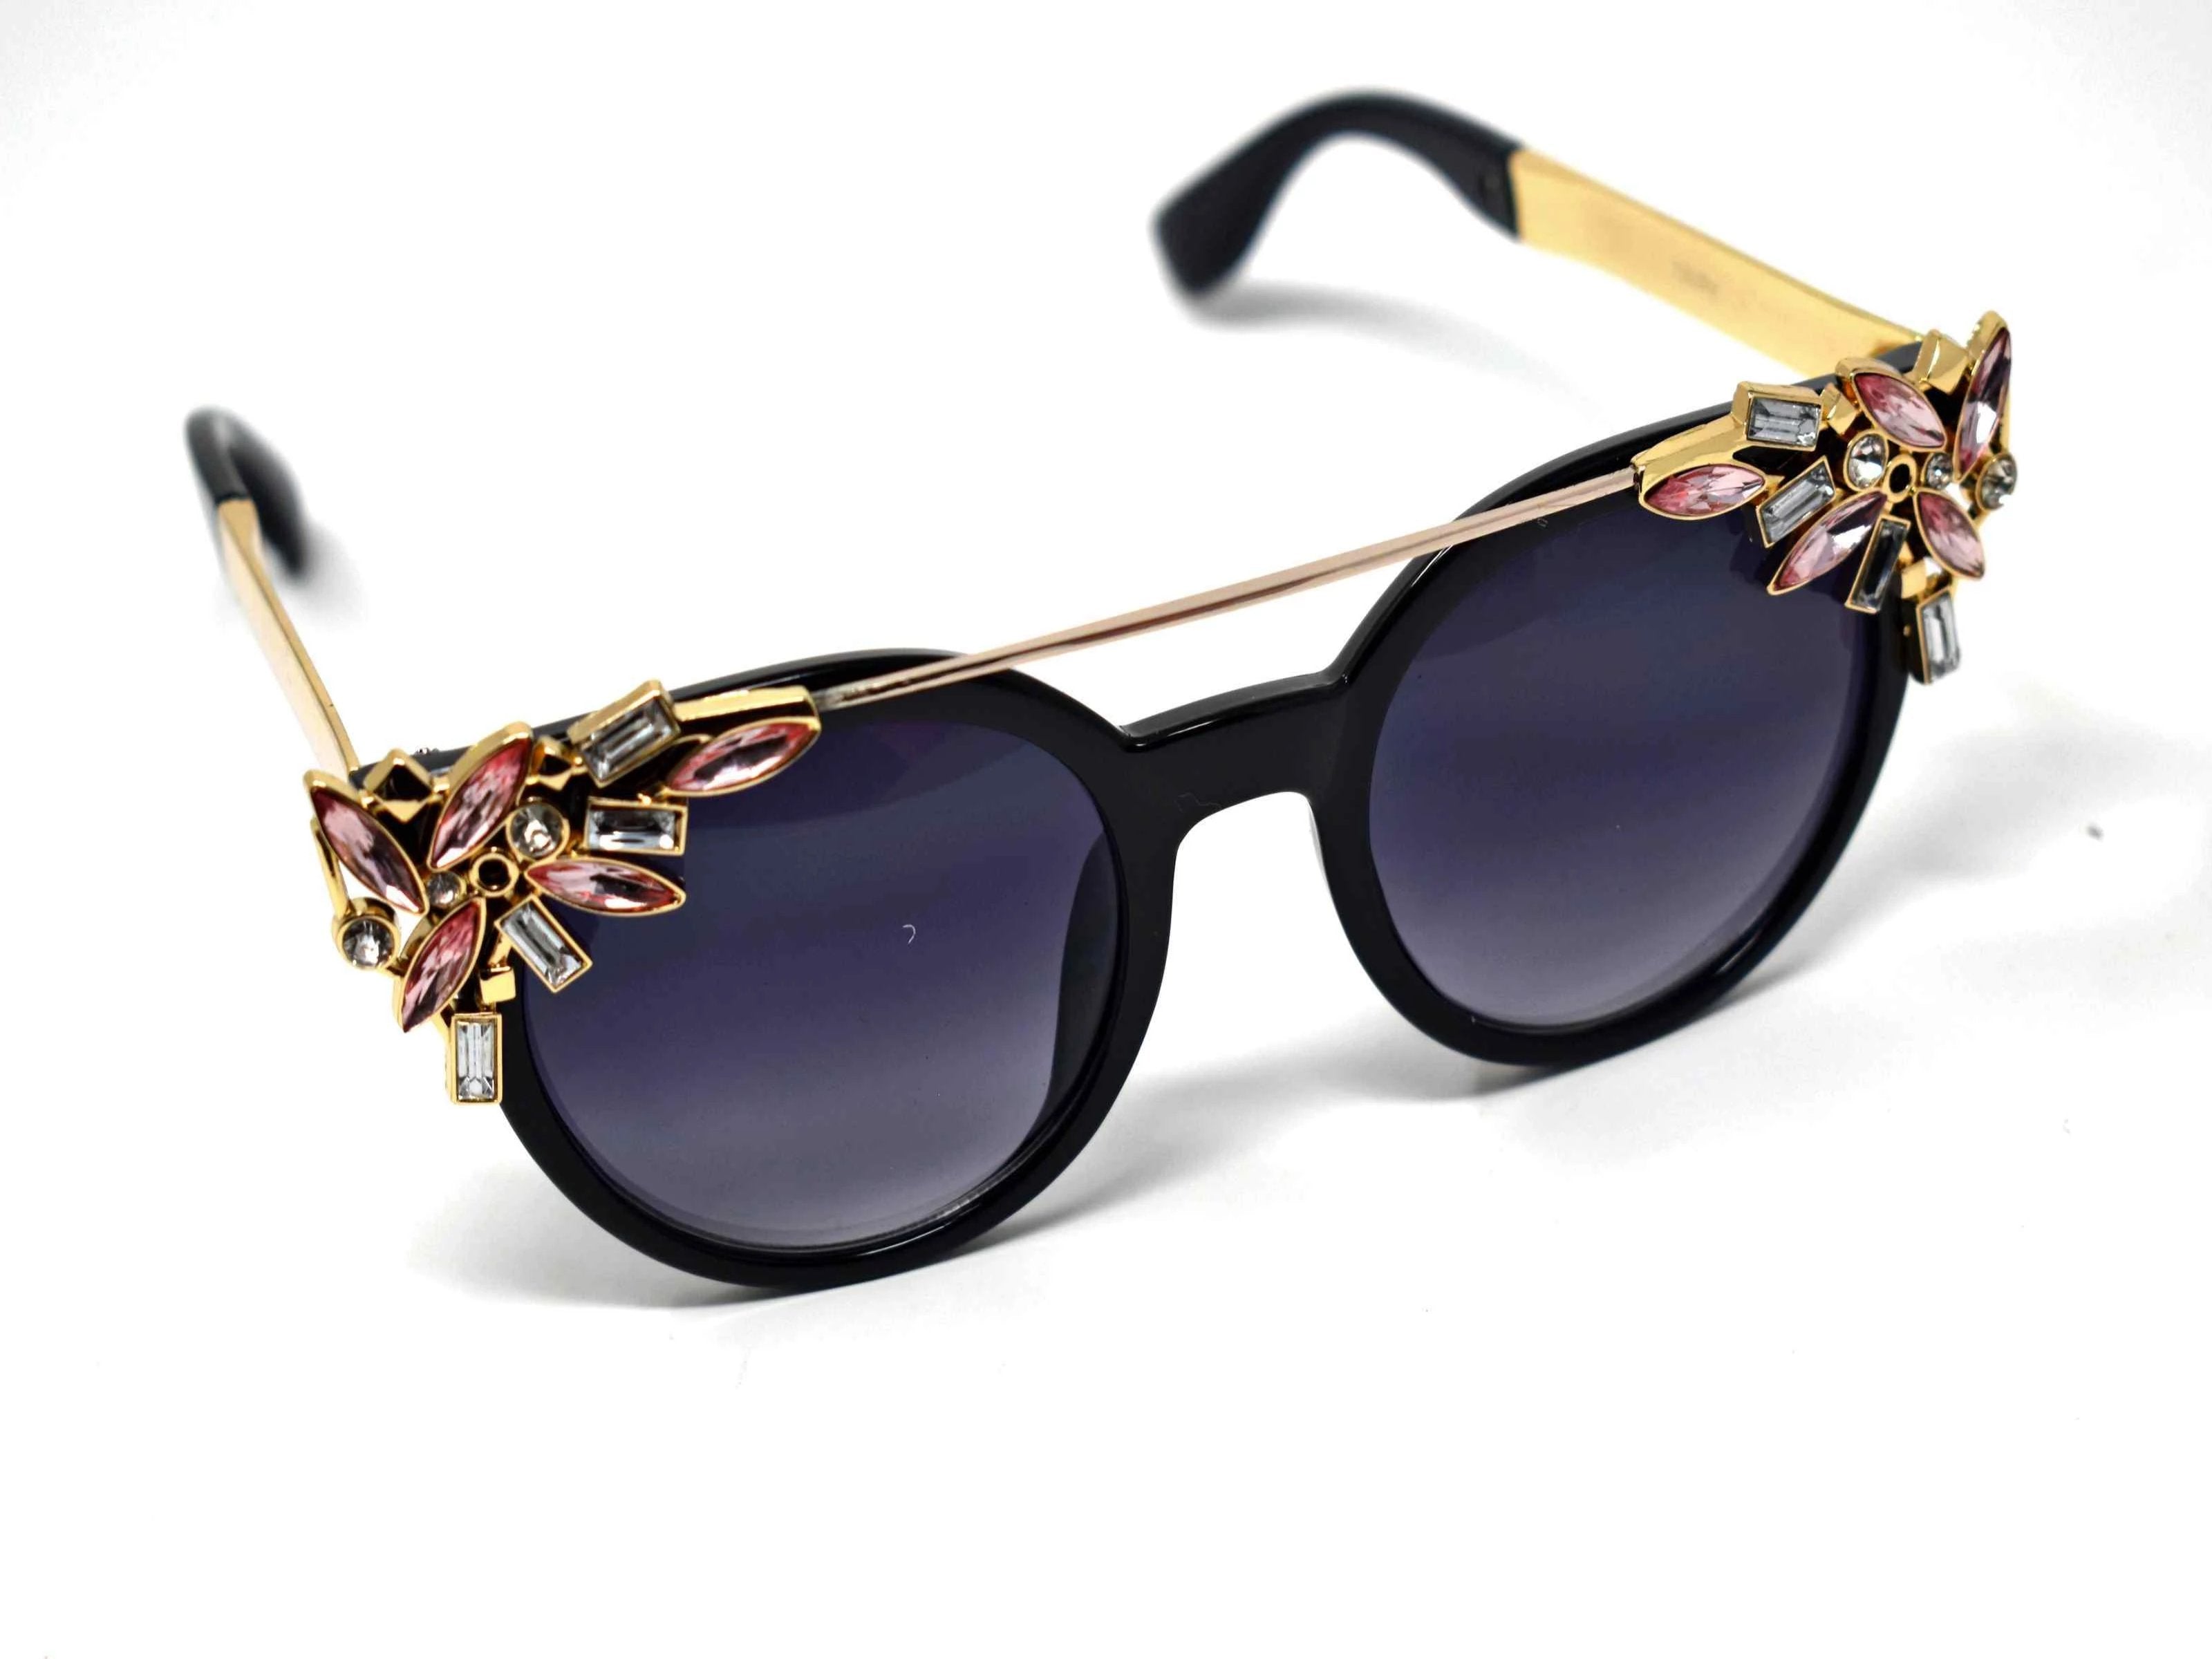 Trend setter and attention getter is what they will call you in these Pansy black sunglasses with a sleek gold trim adorned in pink and clear gems, in a pantos style frame.